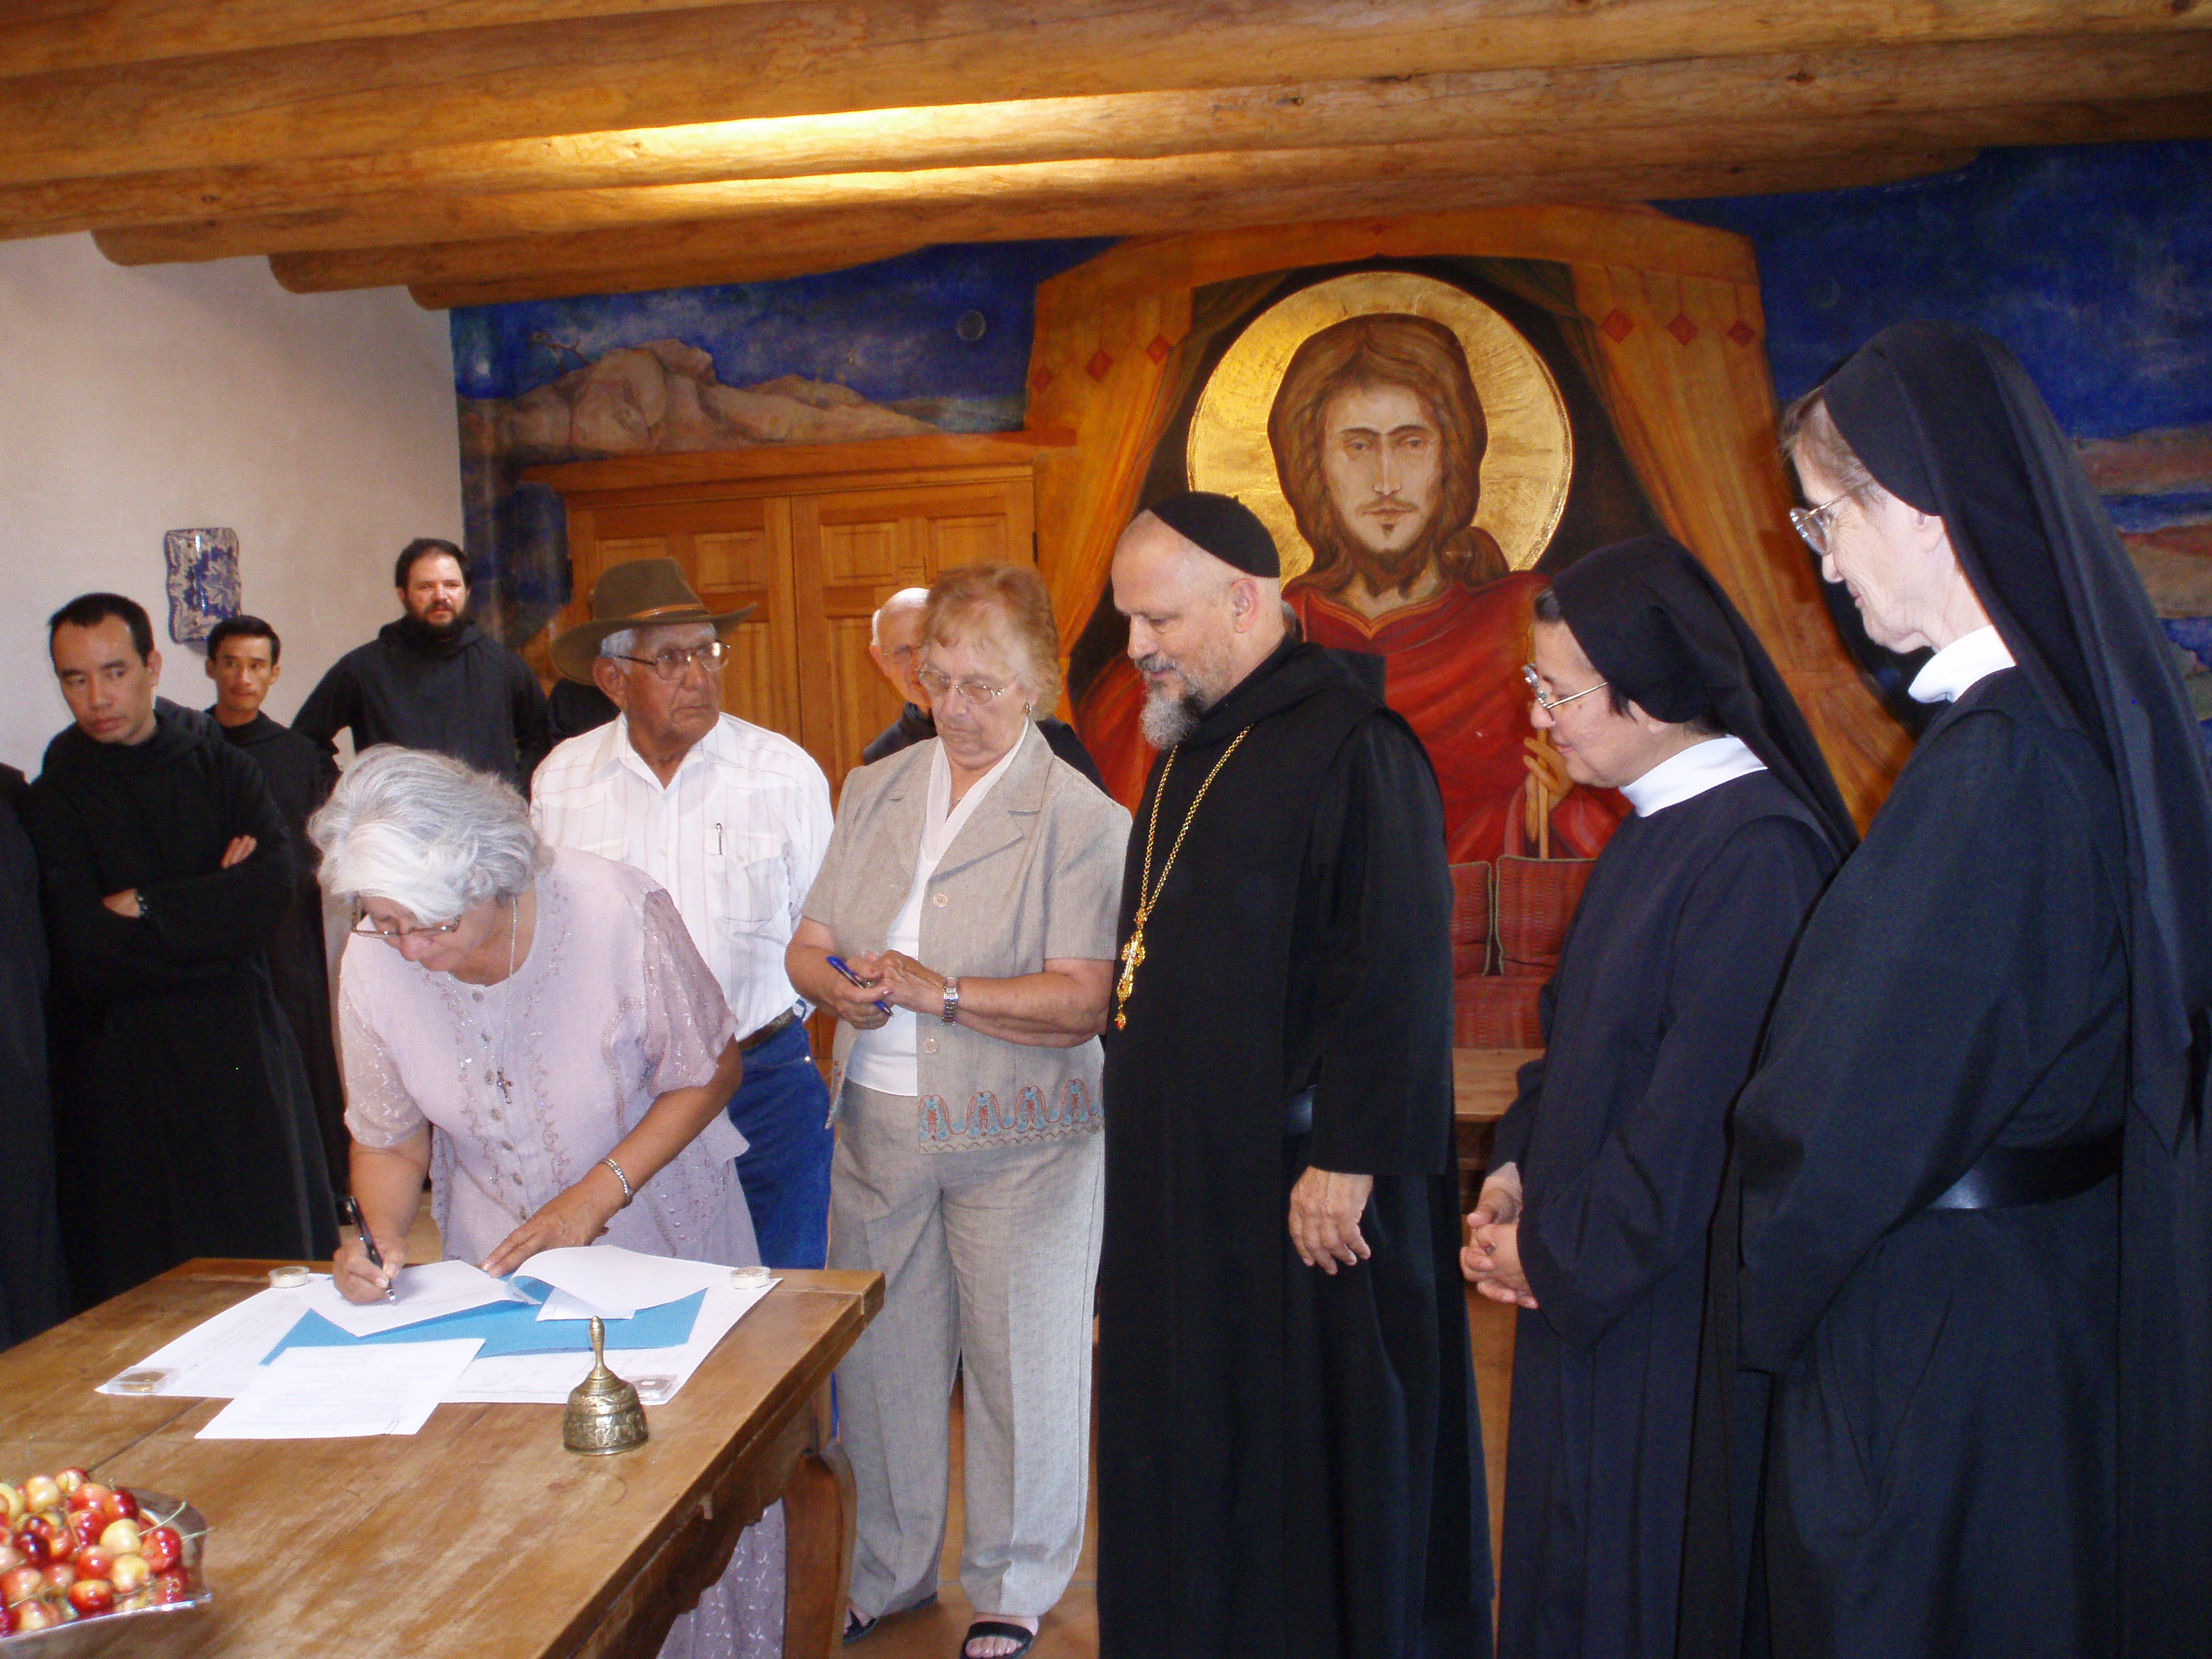 Left to right: Louella B. Evans, Jose Florez, Florence Florez, Abbot Philip Lawrence, Mother Mary Benedicta Serna and Sister Mary Fisher